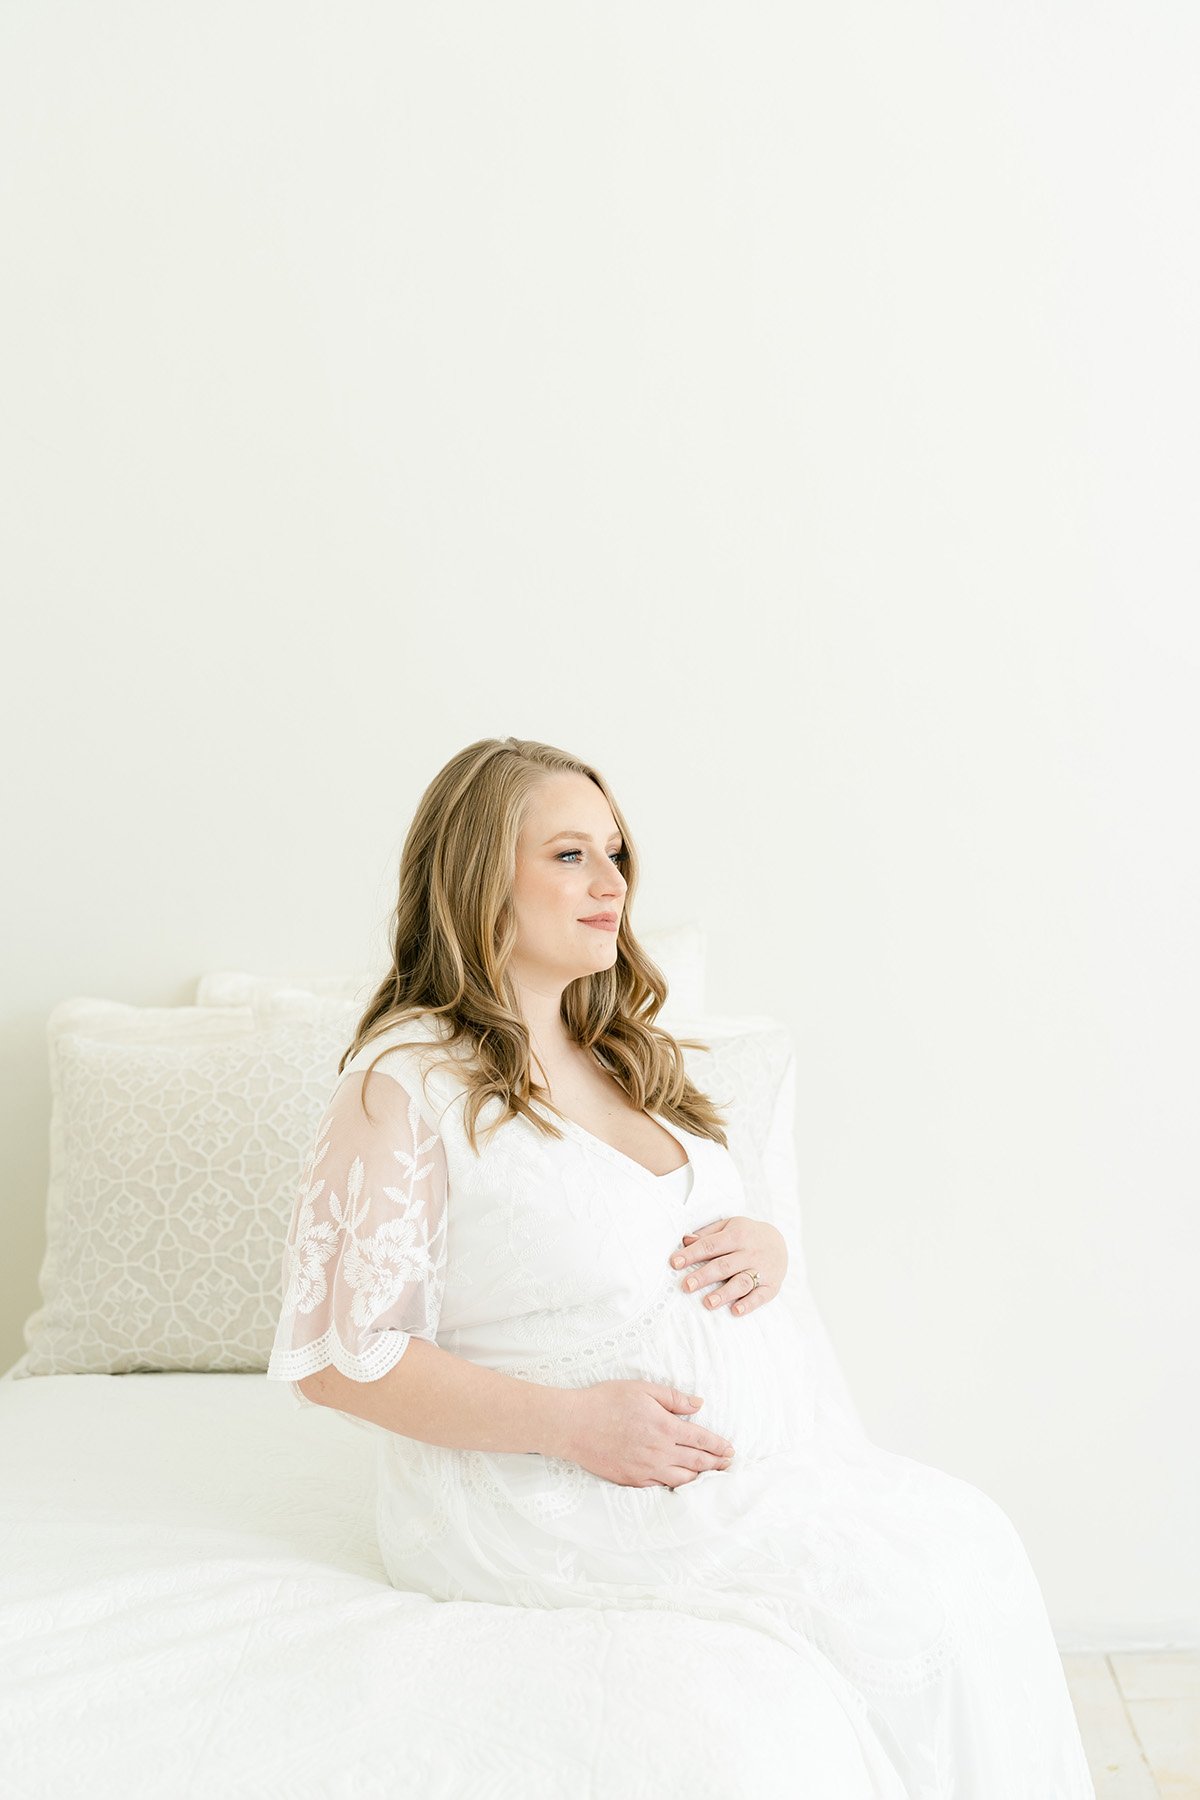 simple-fun-relaxed-maternity-pregnancy-photo-session-newborn-photographer-louisville-ky